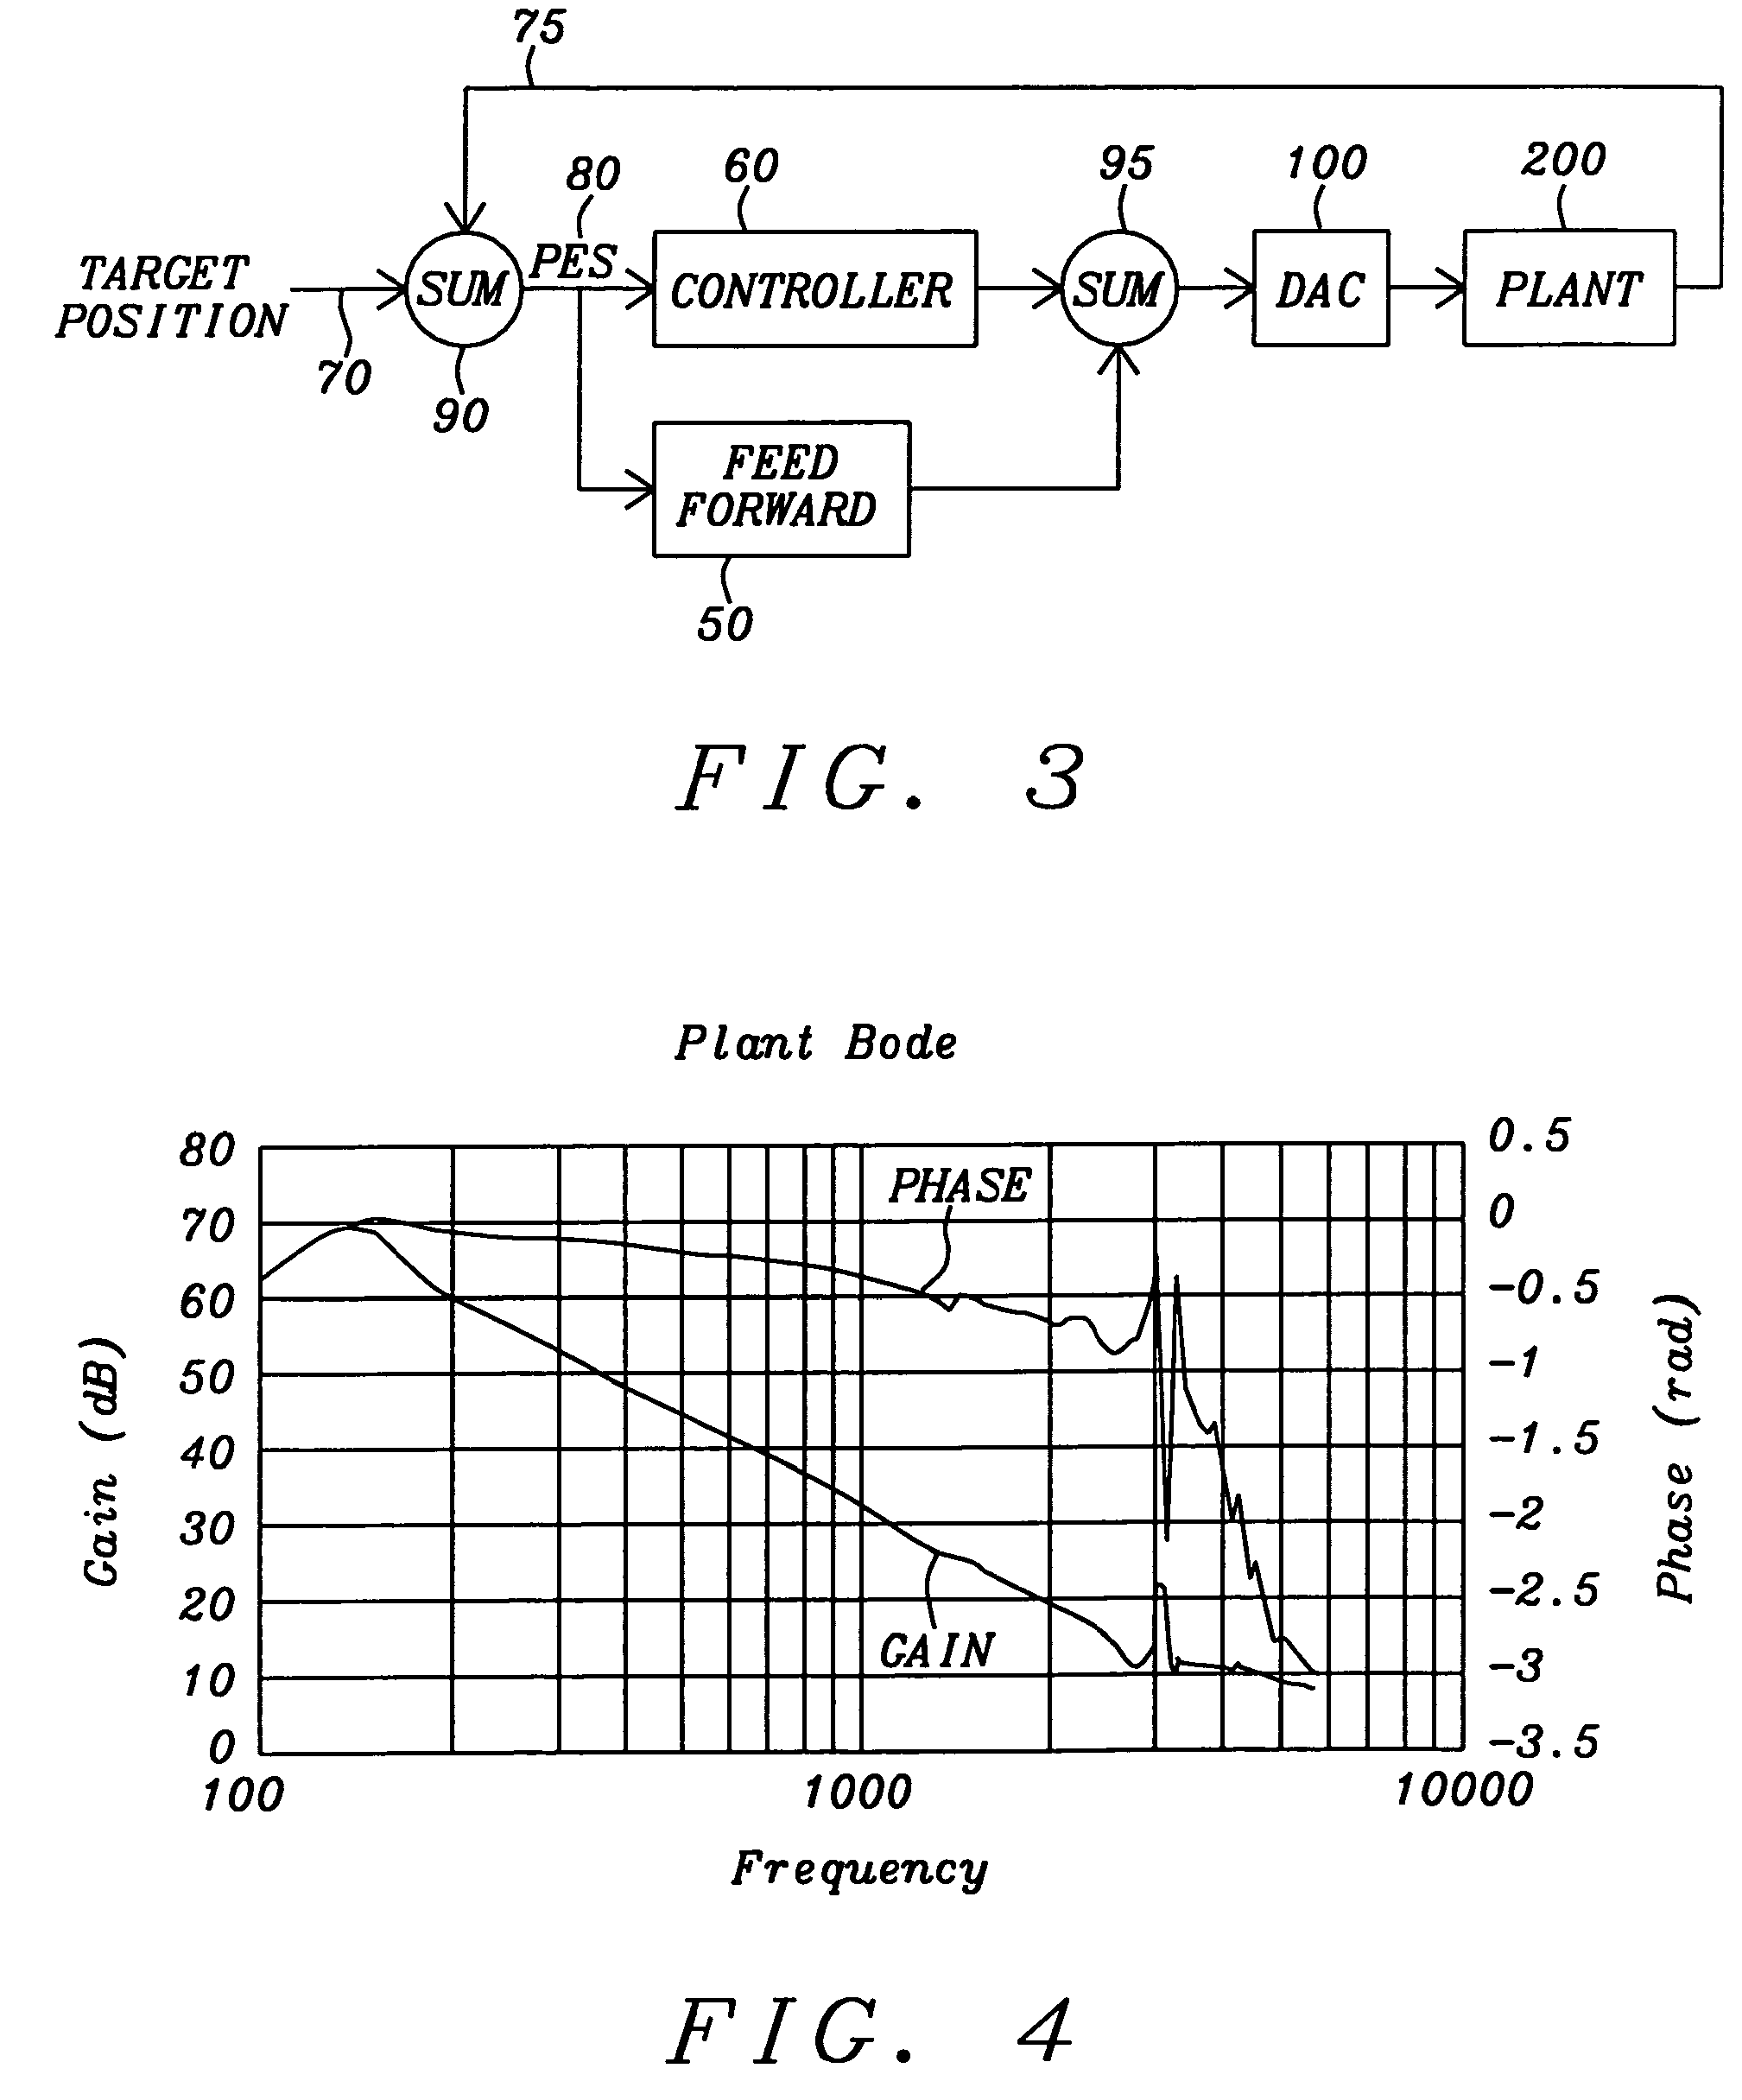 Feed-forward method for repeatable runout cancellation